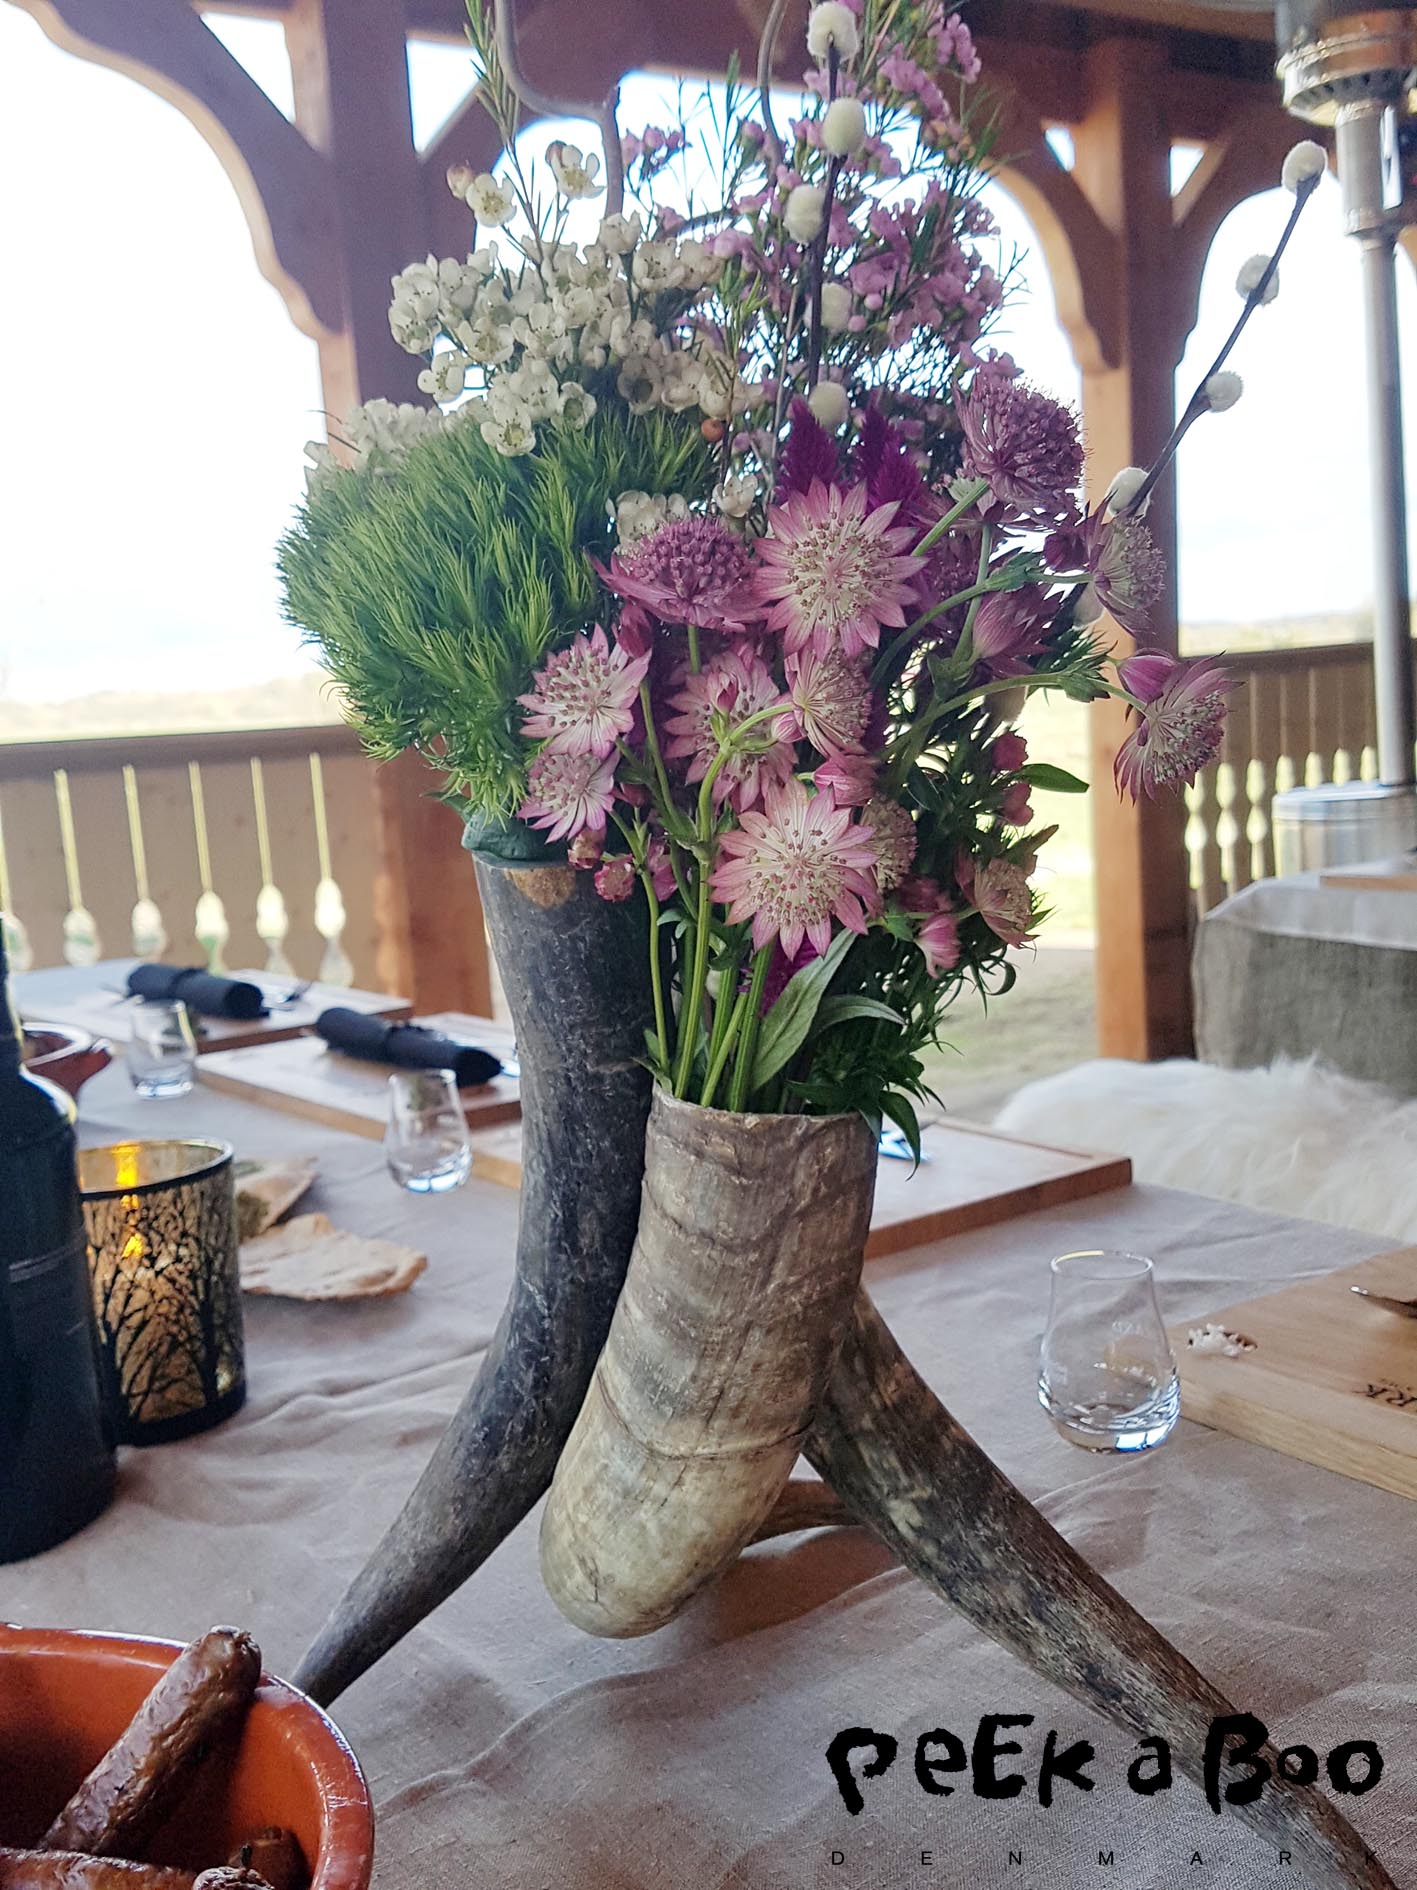 Even the tablesetting was in the best viking style, I loved these vases that I think would make an easy DIY. Maybe I should make it with turtorial. for you guys...let me know If you need that.